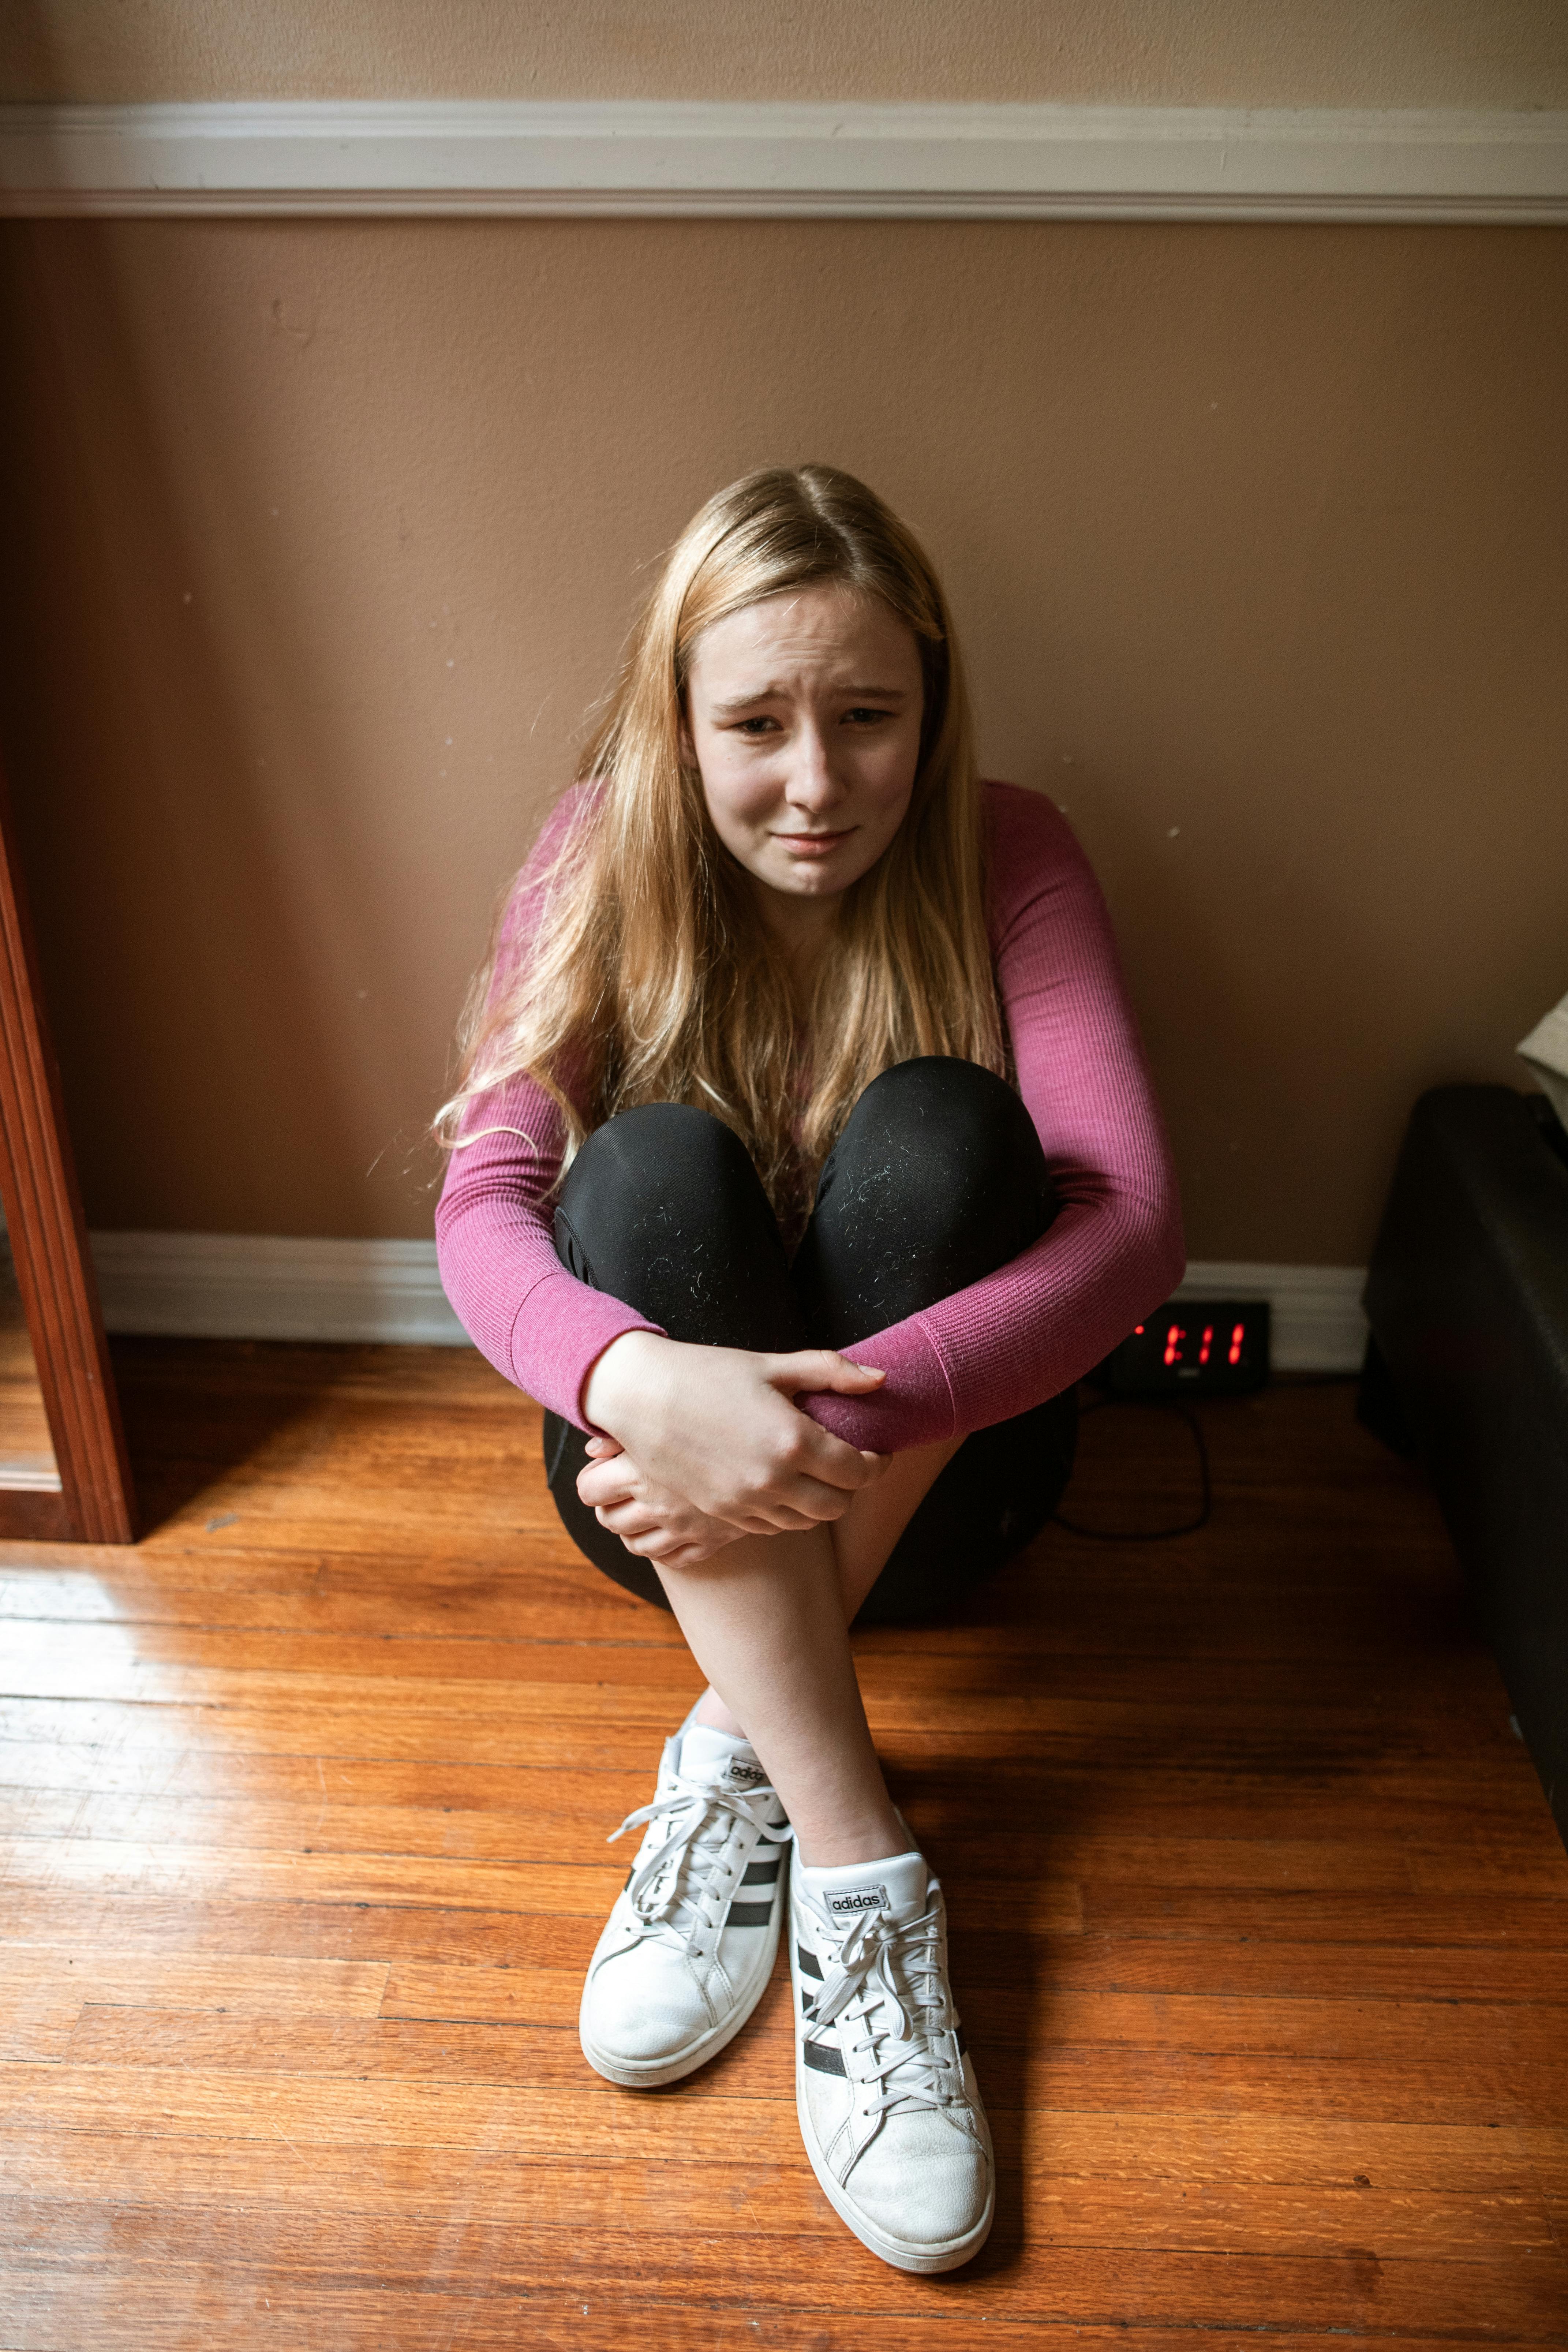 A teenage girl sitting on the floor crying | Source: Pexels